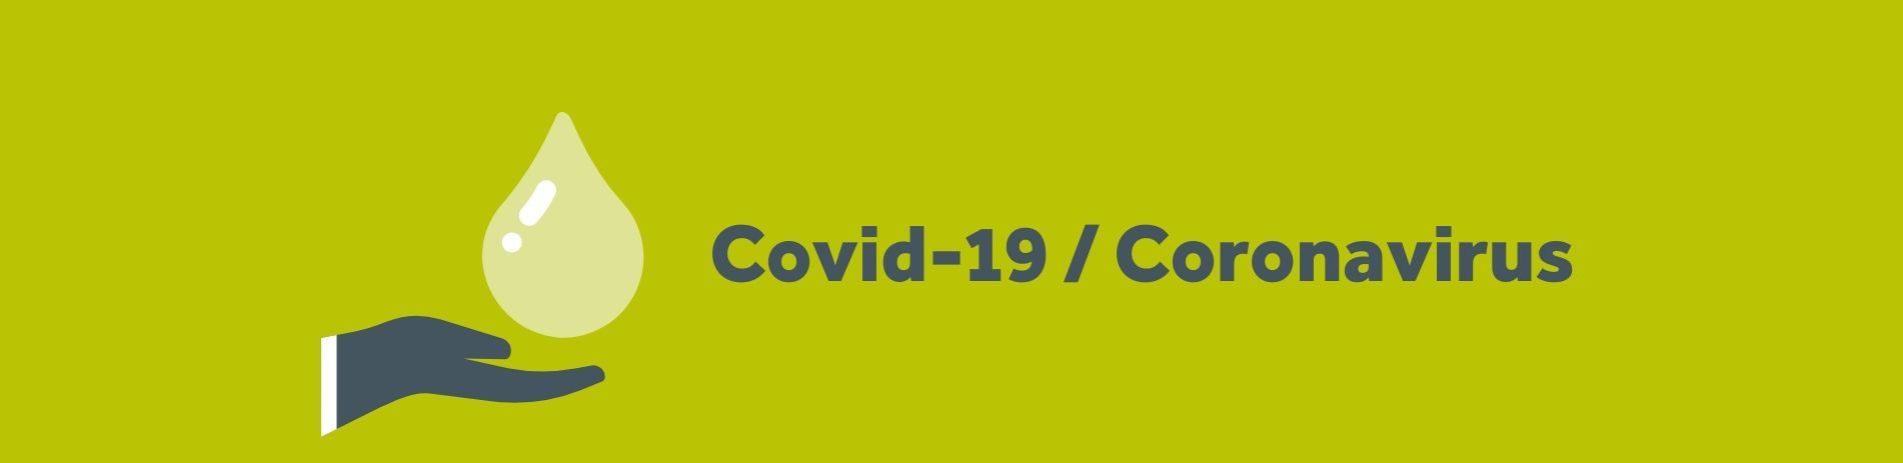 icon-of-hand-and-sanitiser-gel-on-green-background-text-reads-covid-19-coronavirus